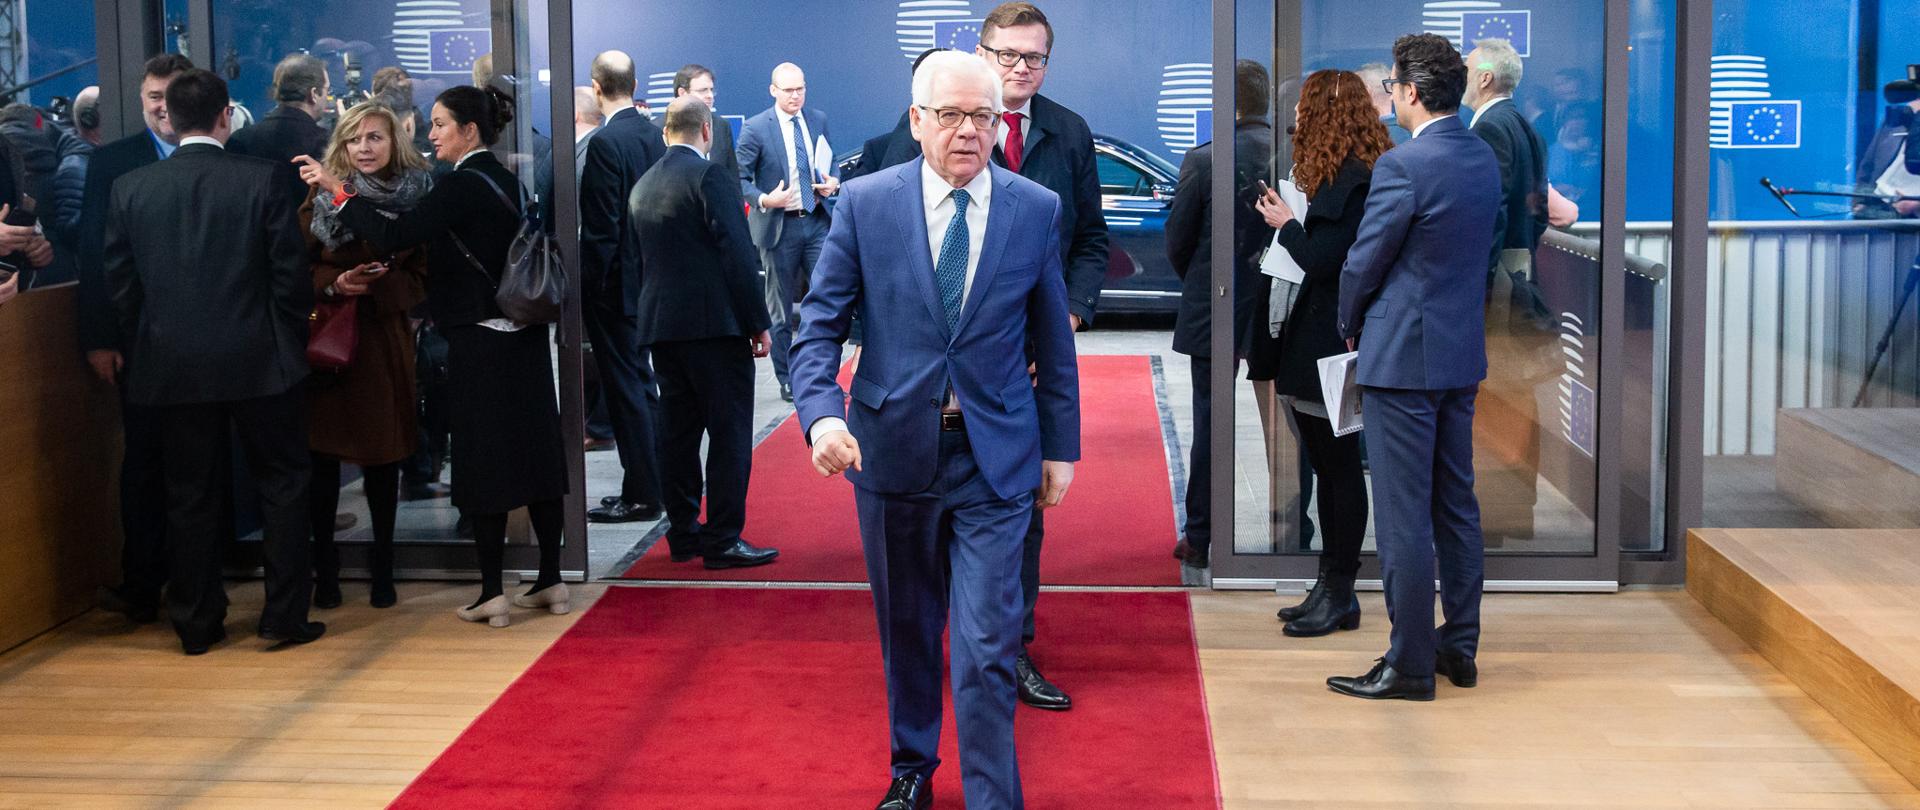 Minister Jacek Czaputowicz at Foreign Affairs Council meeting 